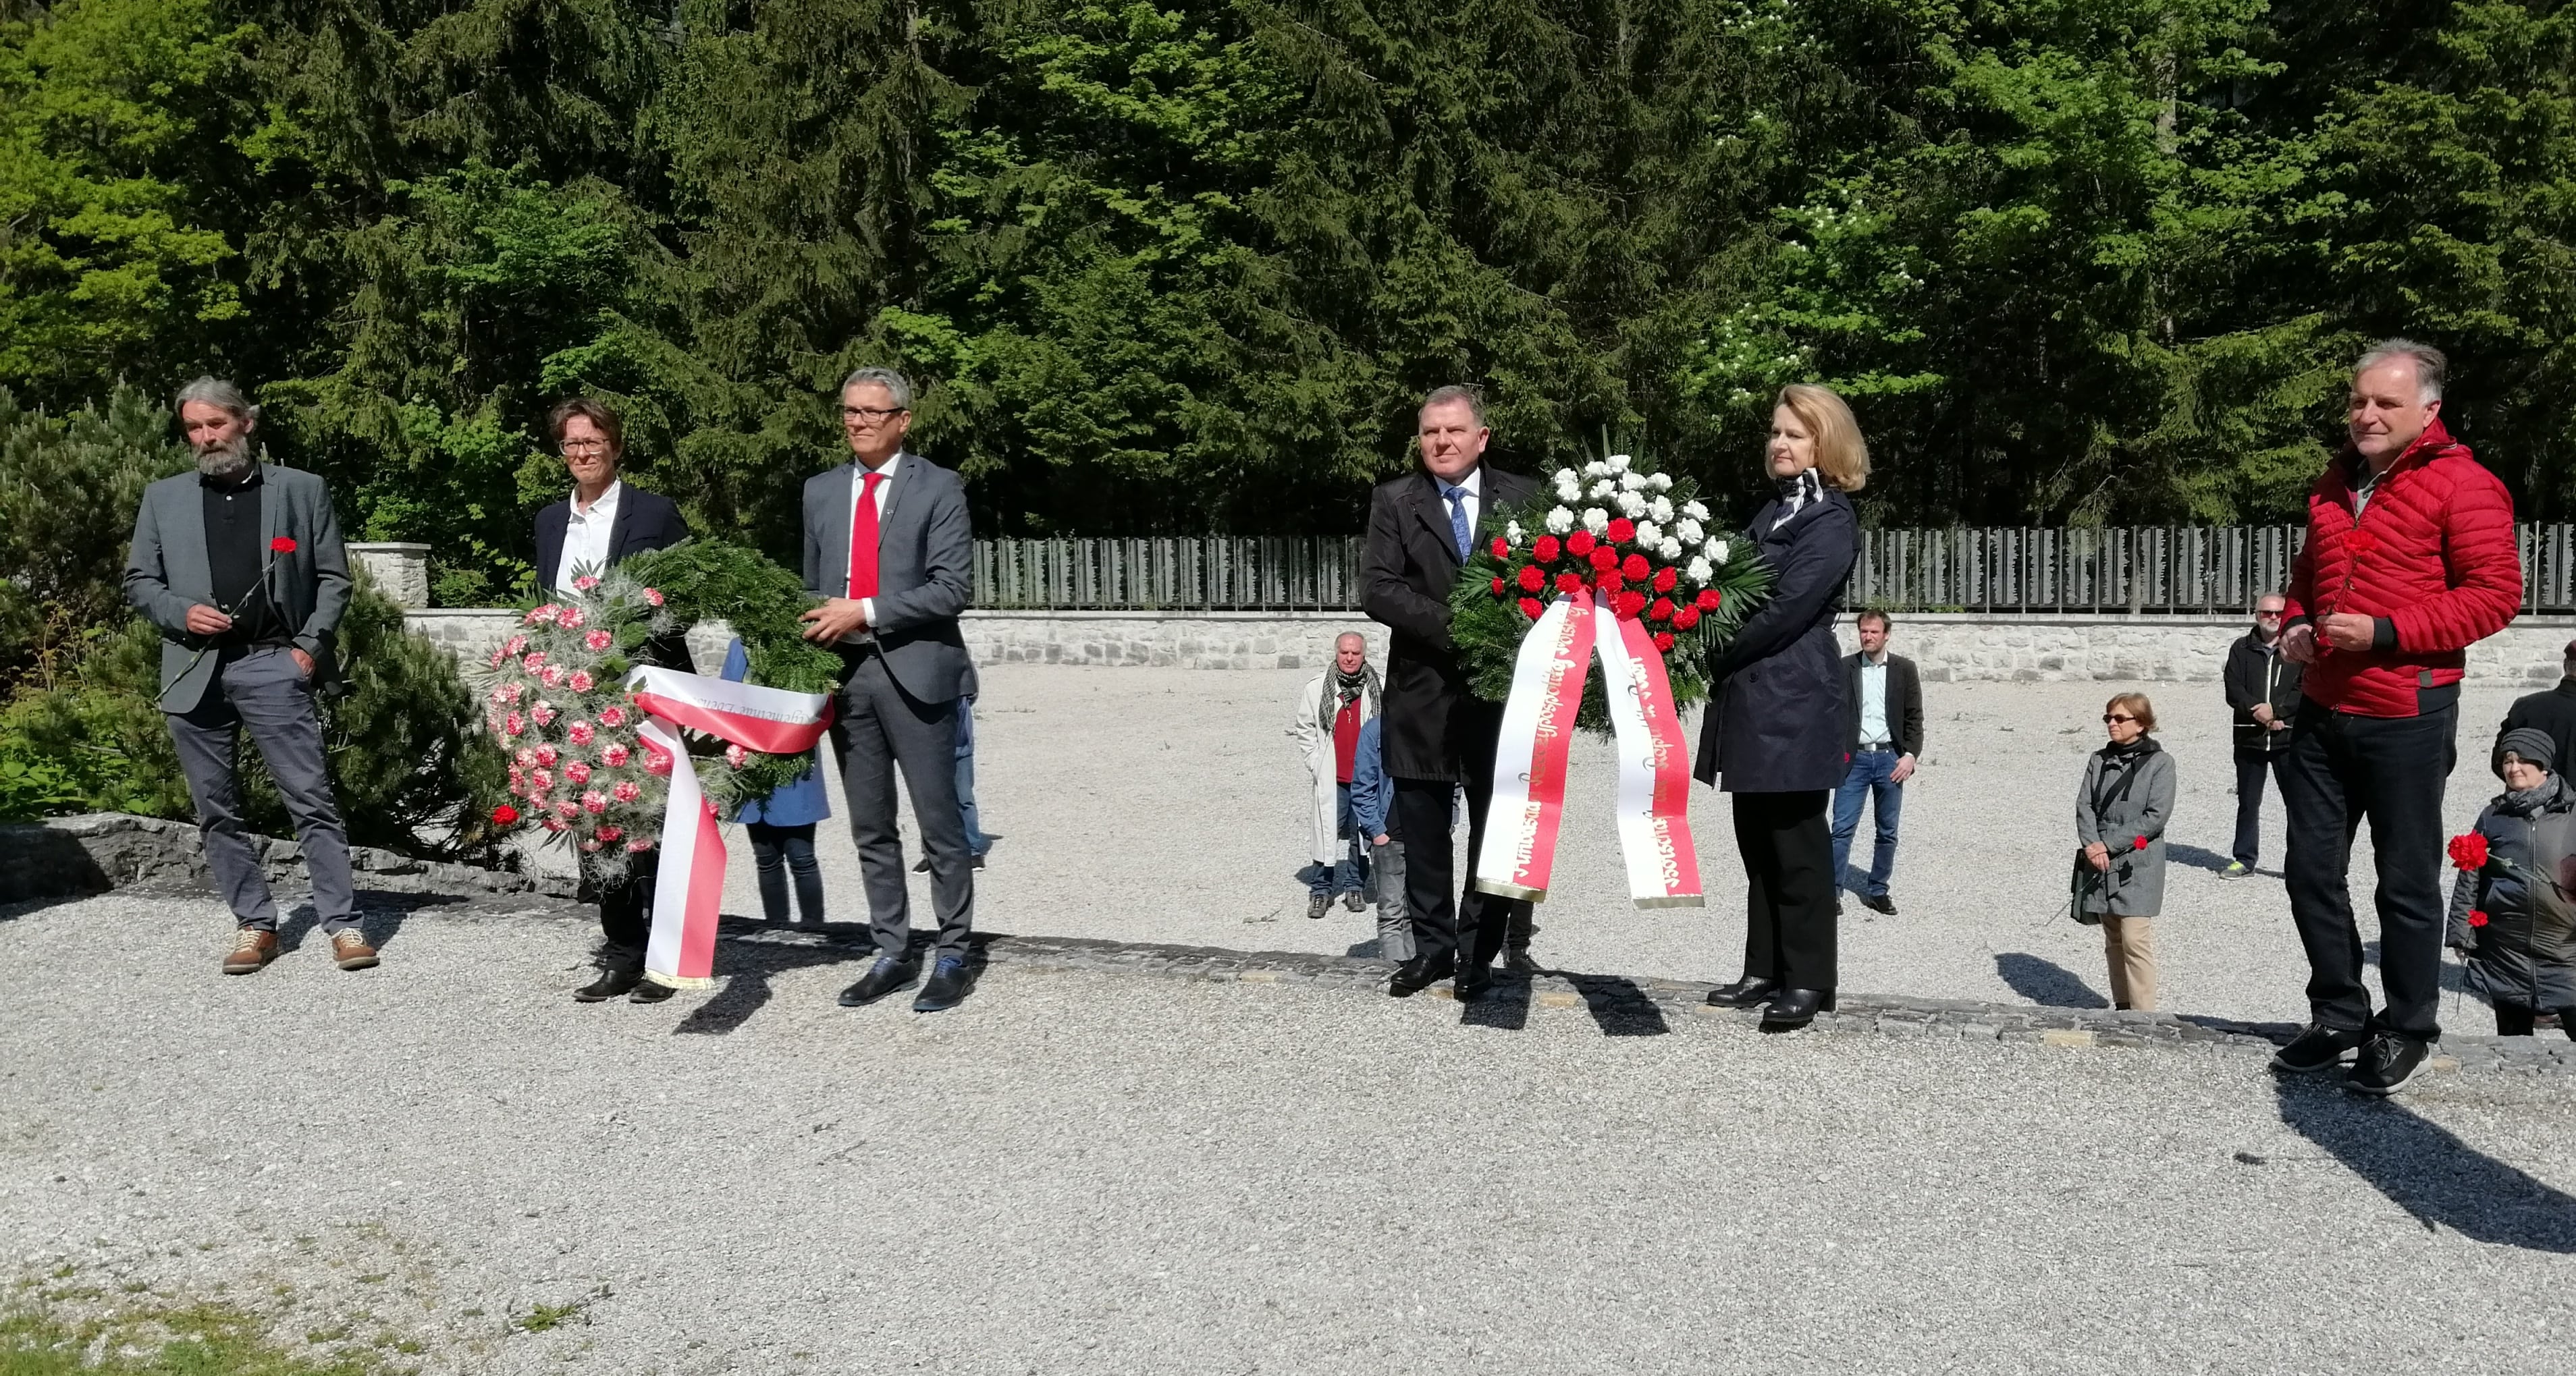 from left to right: Wolfgang Quatember, member of the state parliament Sabine Promberger, mayor Markus Siller, military attaché colonel Adam Stephien, polish ambasador Jolanta Rózá Kozlowska